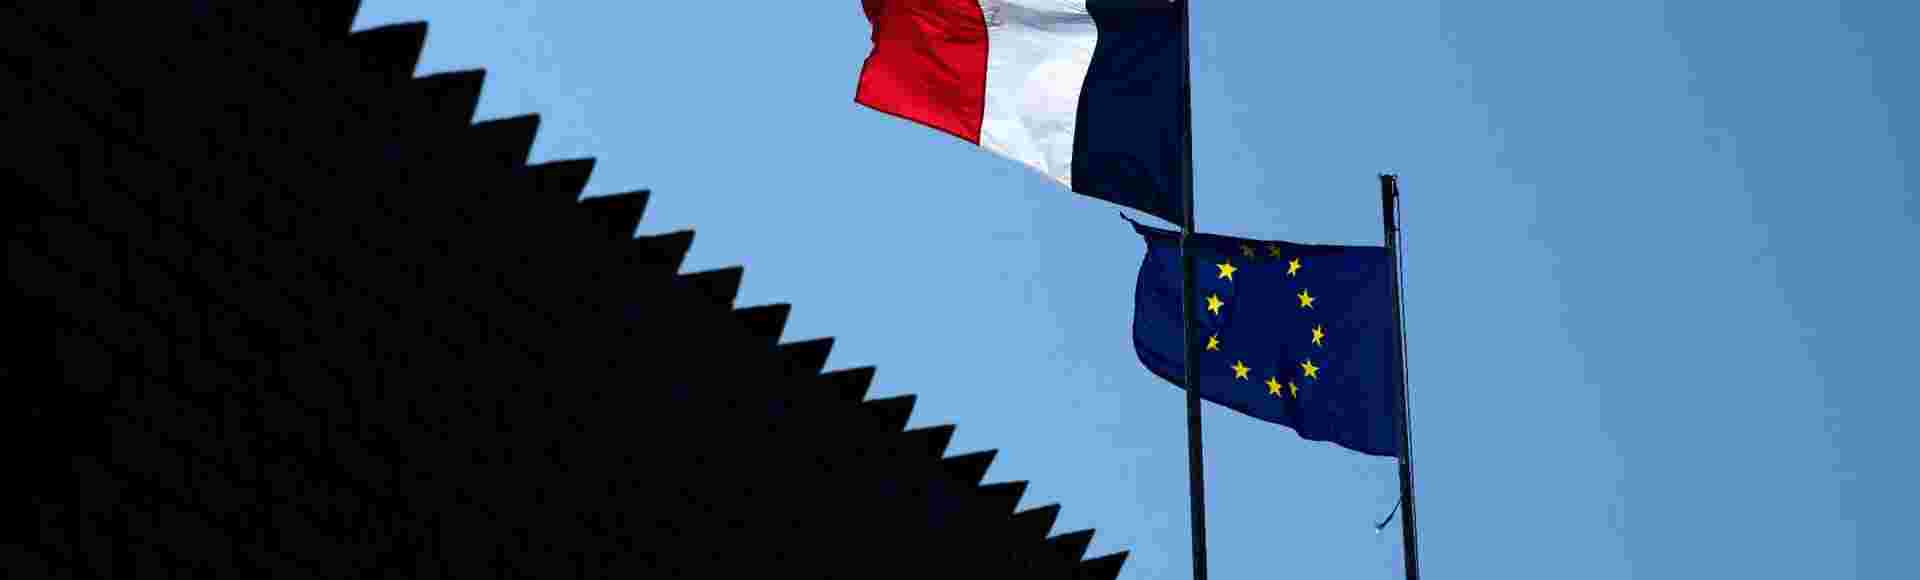 French and European flags